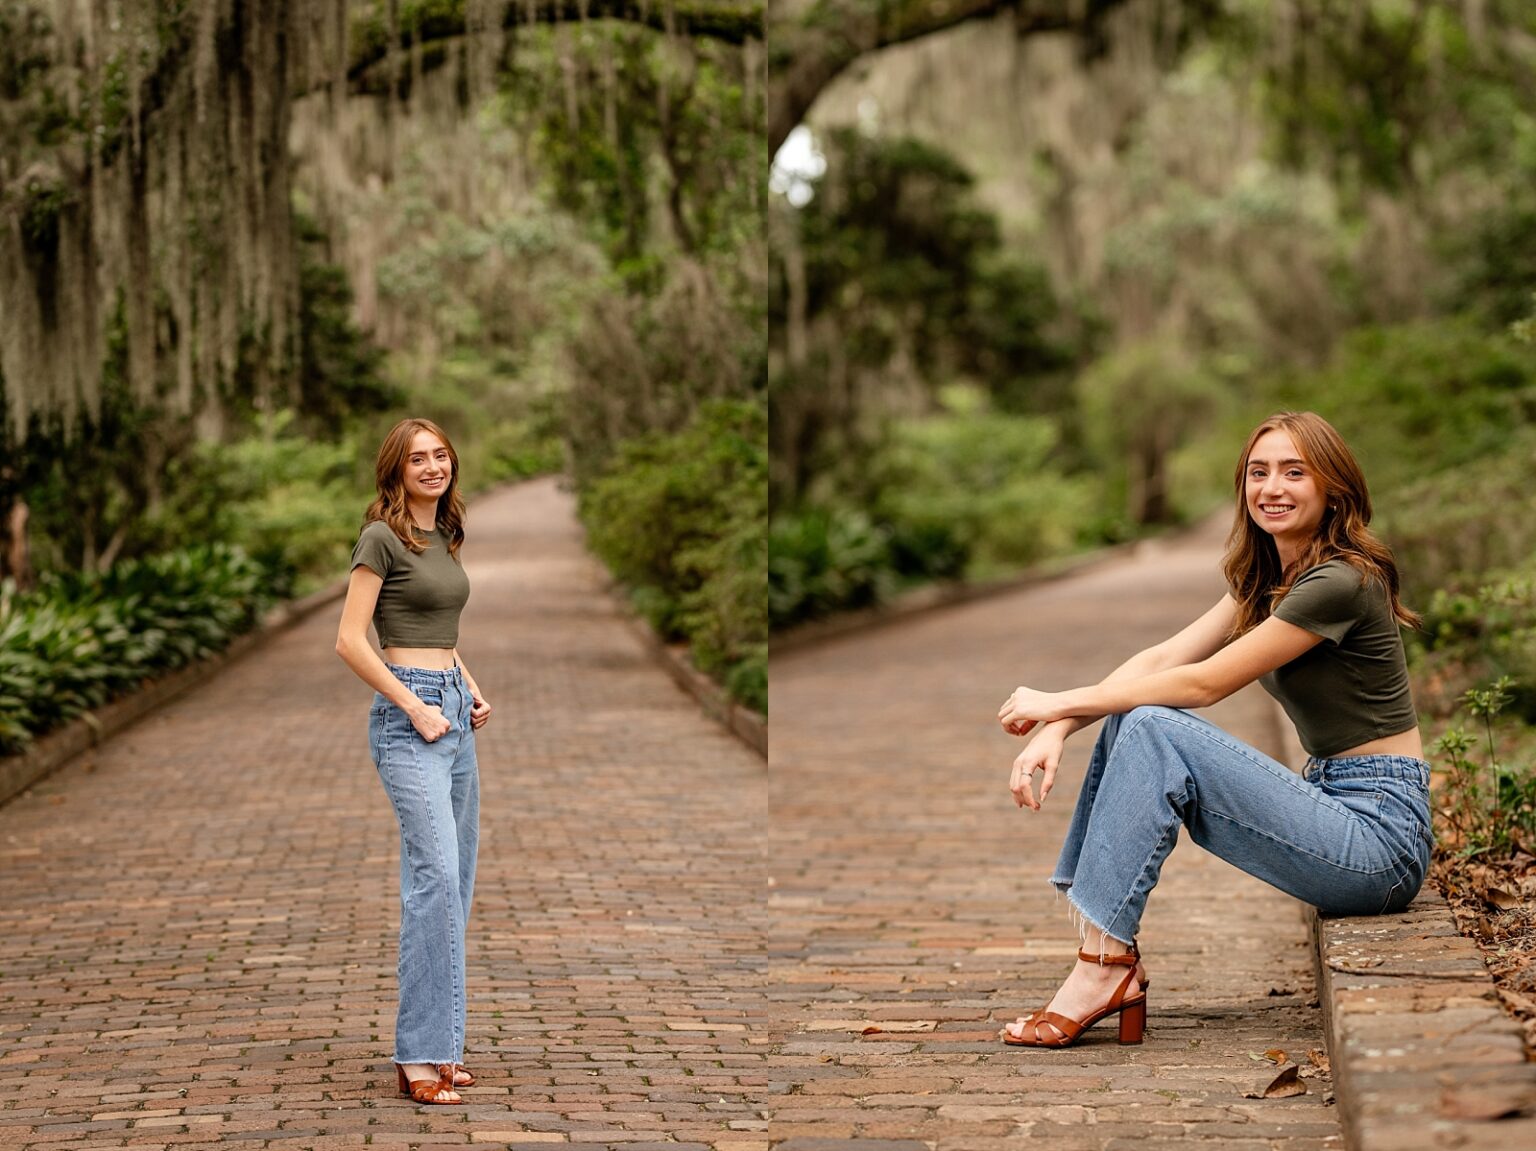 Tallahassee senior photographer takes pictures at Alfred Maclay Gardens of senior in simple, but cute outfit with a green top and short heels.